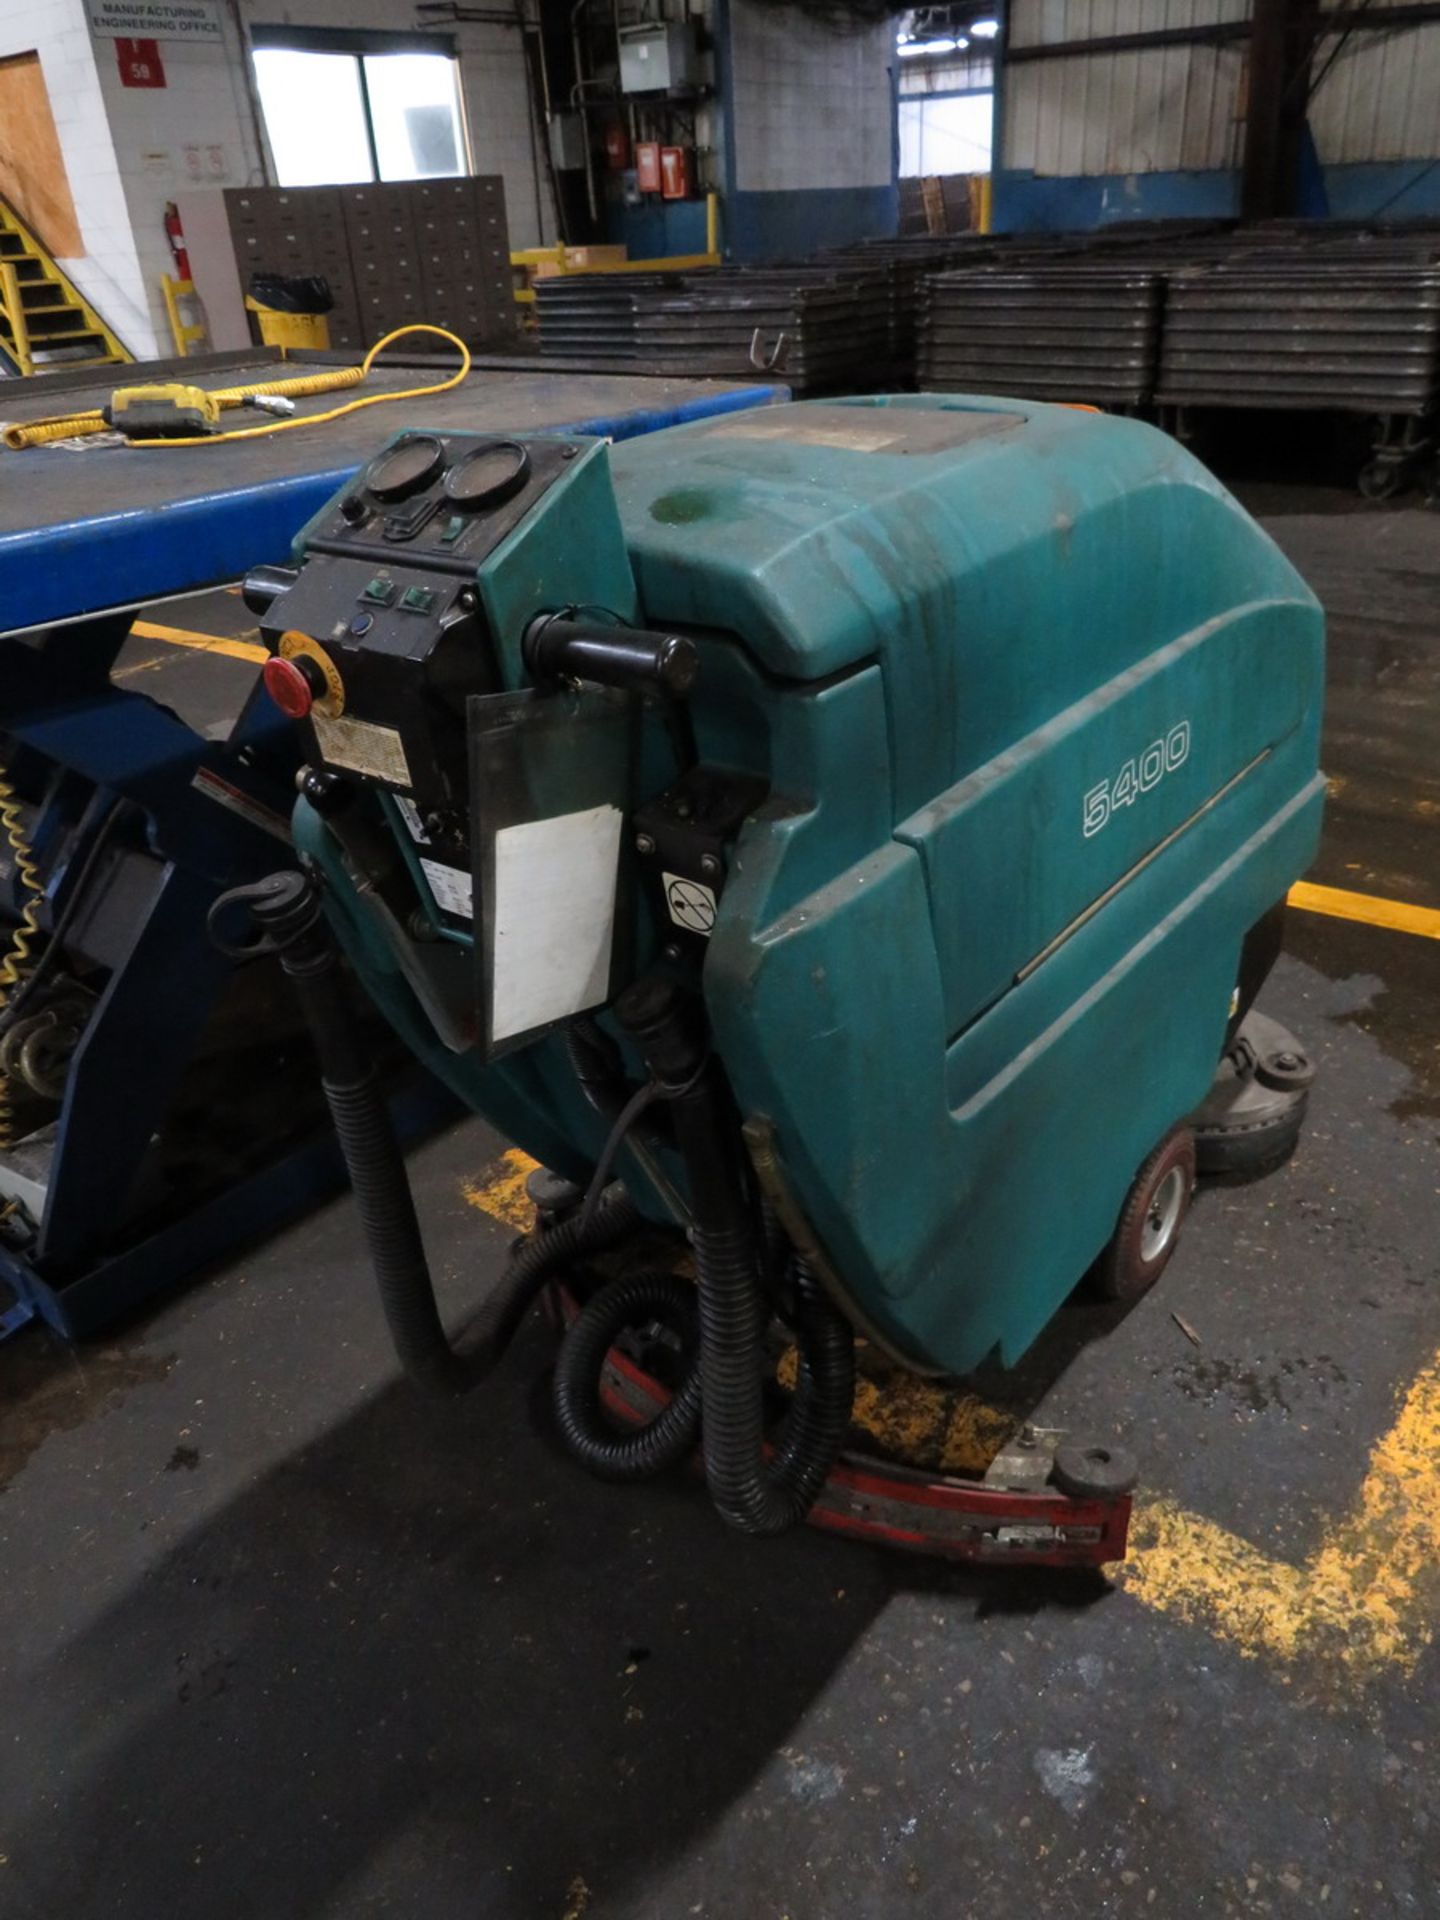 Tennant M5400 24V Electric Walk-Behind Floor Scrubber - Image 2 of 4